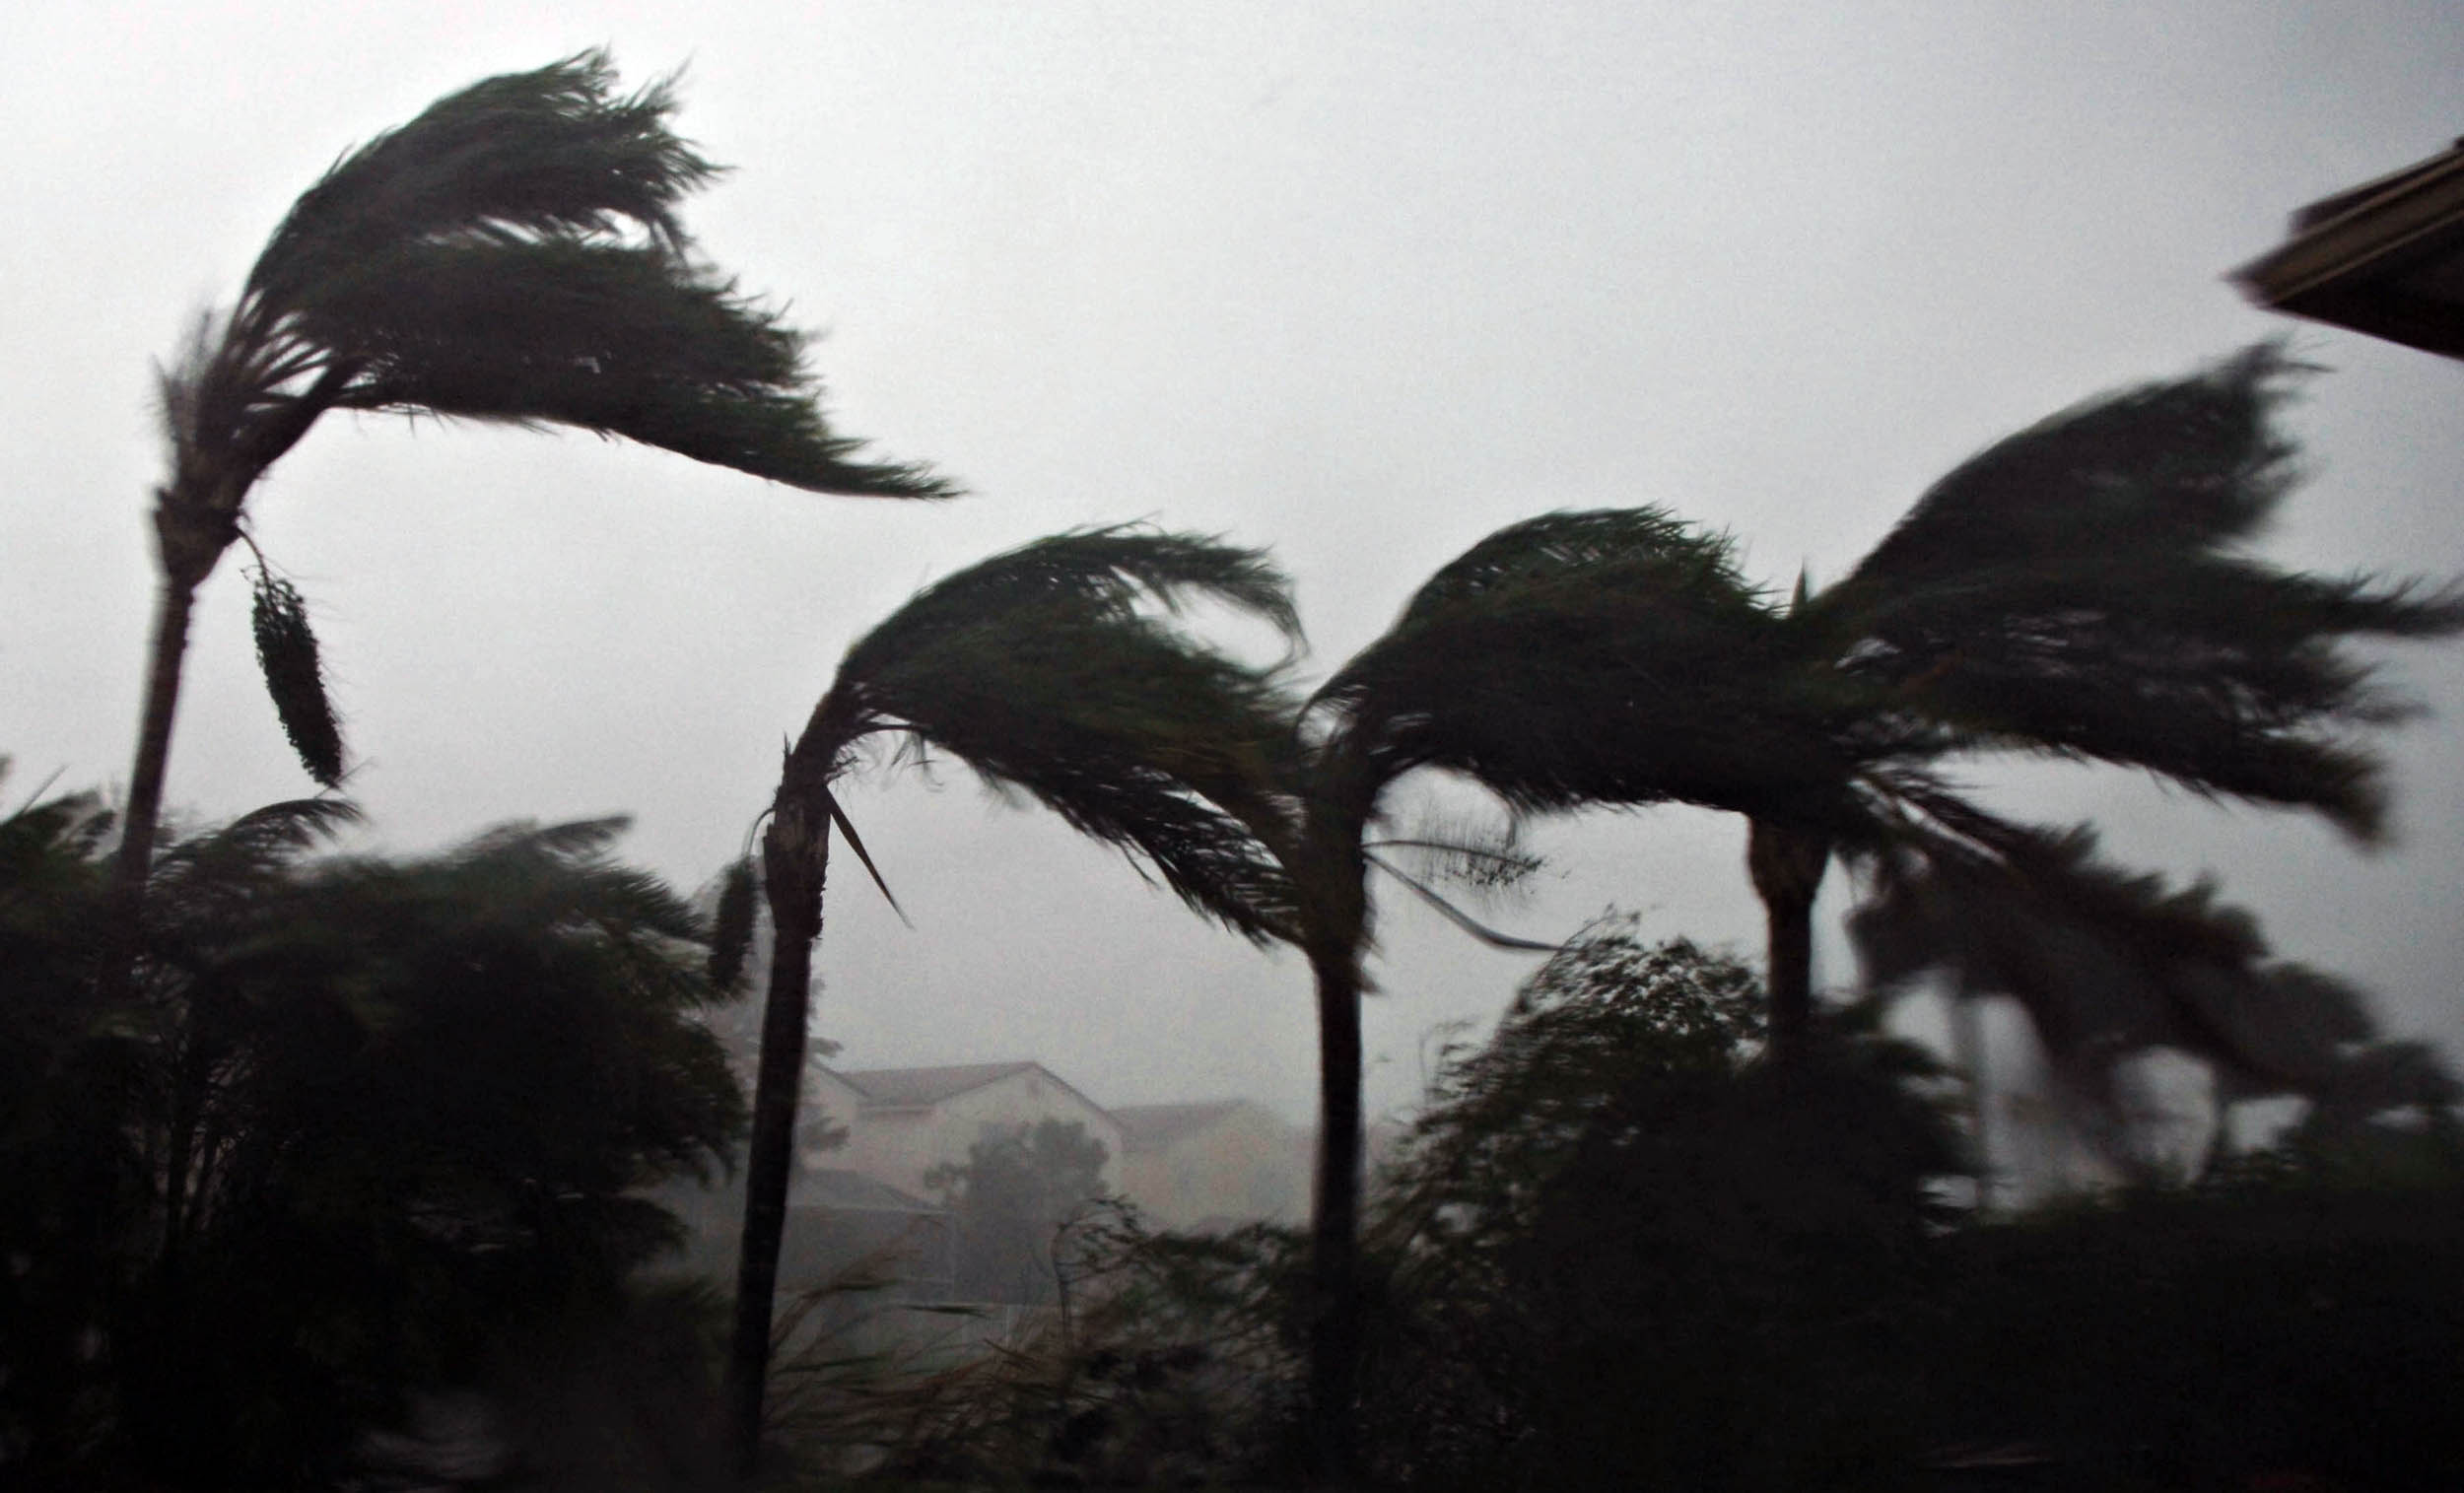 Palm trees bend in the winds of Hurricane Wilma as the storm makes landfall in Plantation, Florida on Oct. 24, 2005. Wilma was the last major hurricane to make landfall in the U.S. (Bloomberg—Bloomberg via Getty Images)